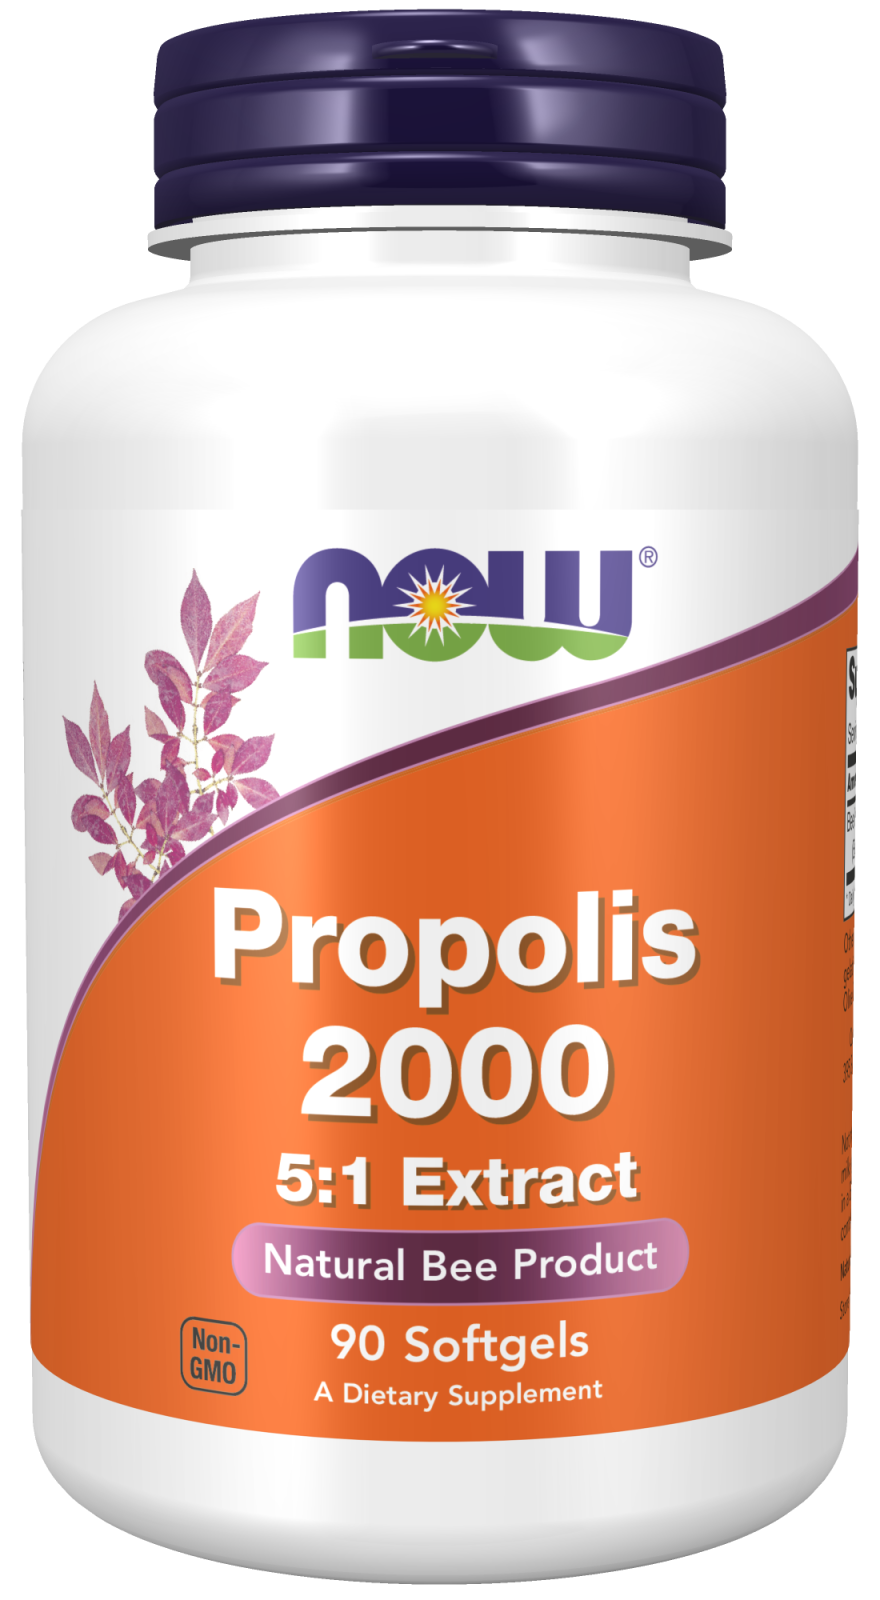 Propolis 2000 5:1 Extract - 90 Softgels Bottle Front